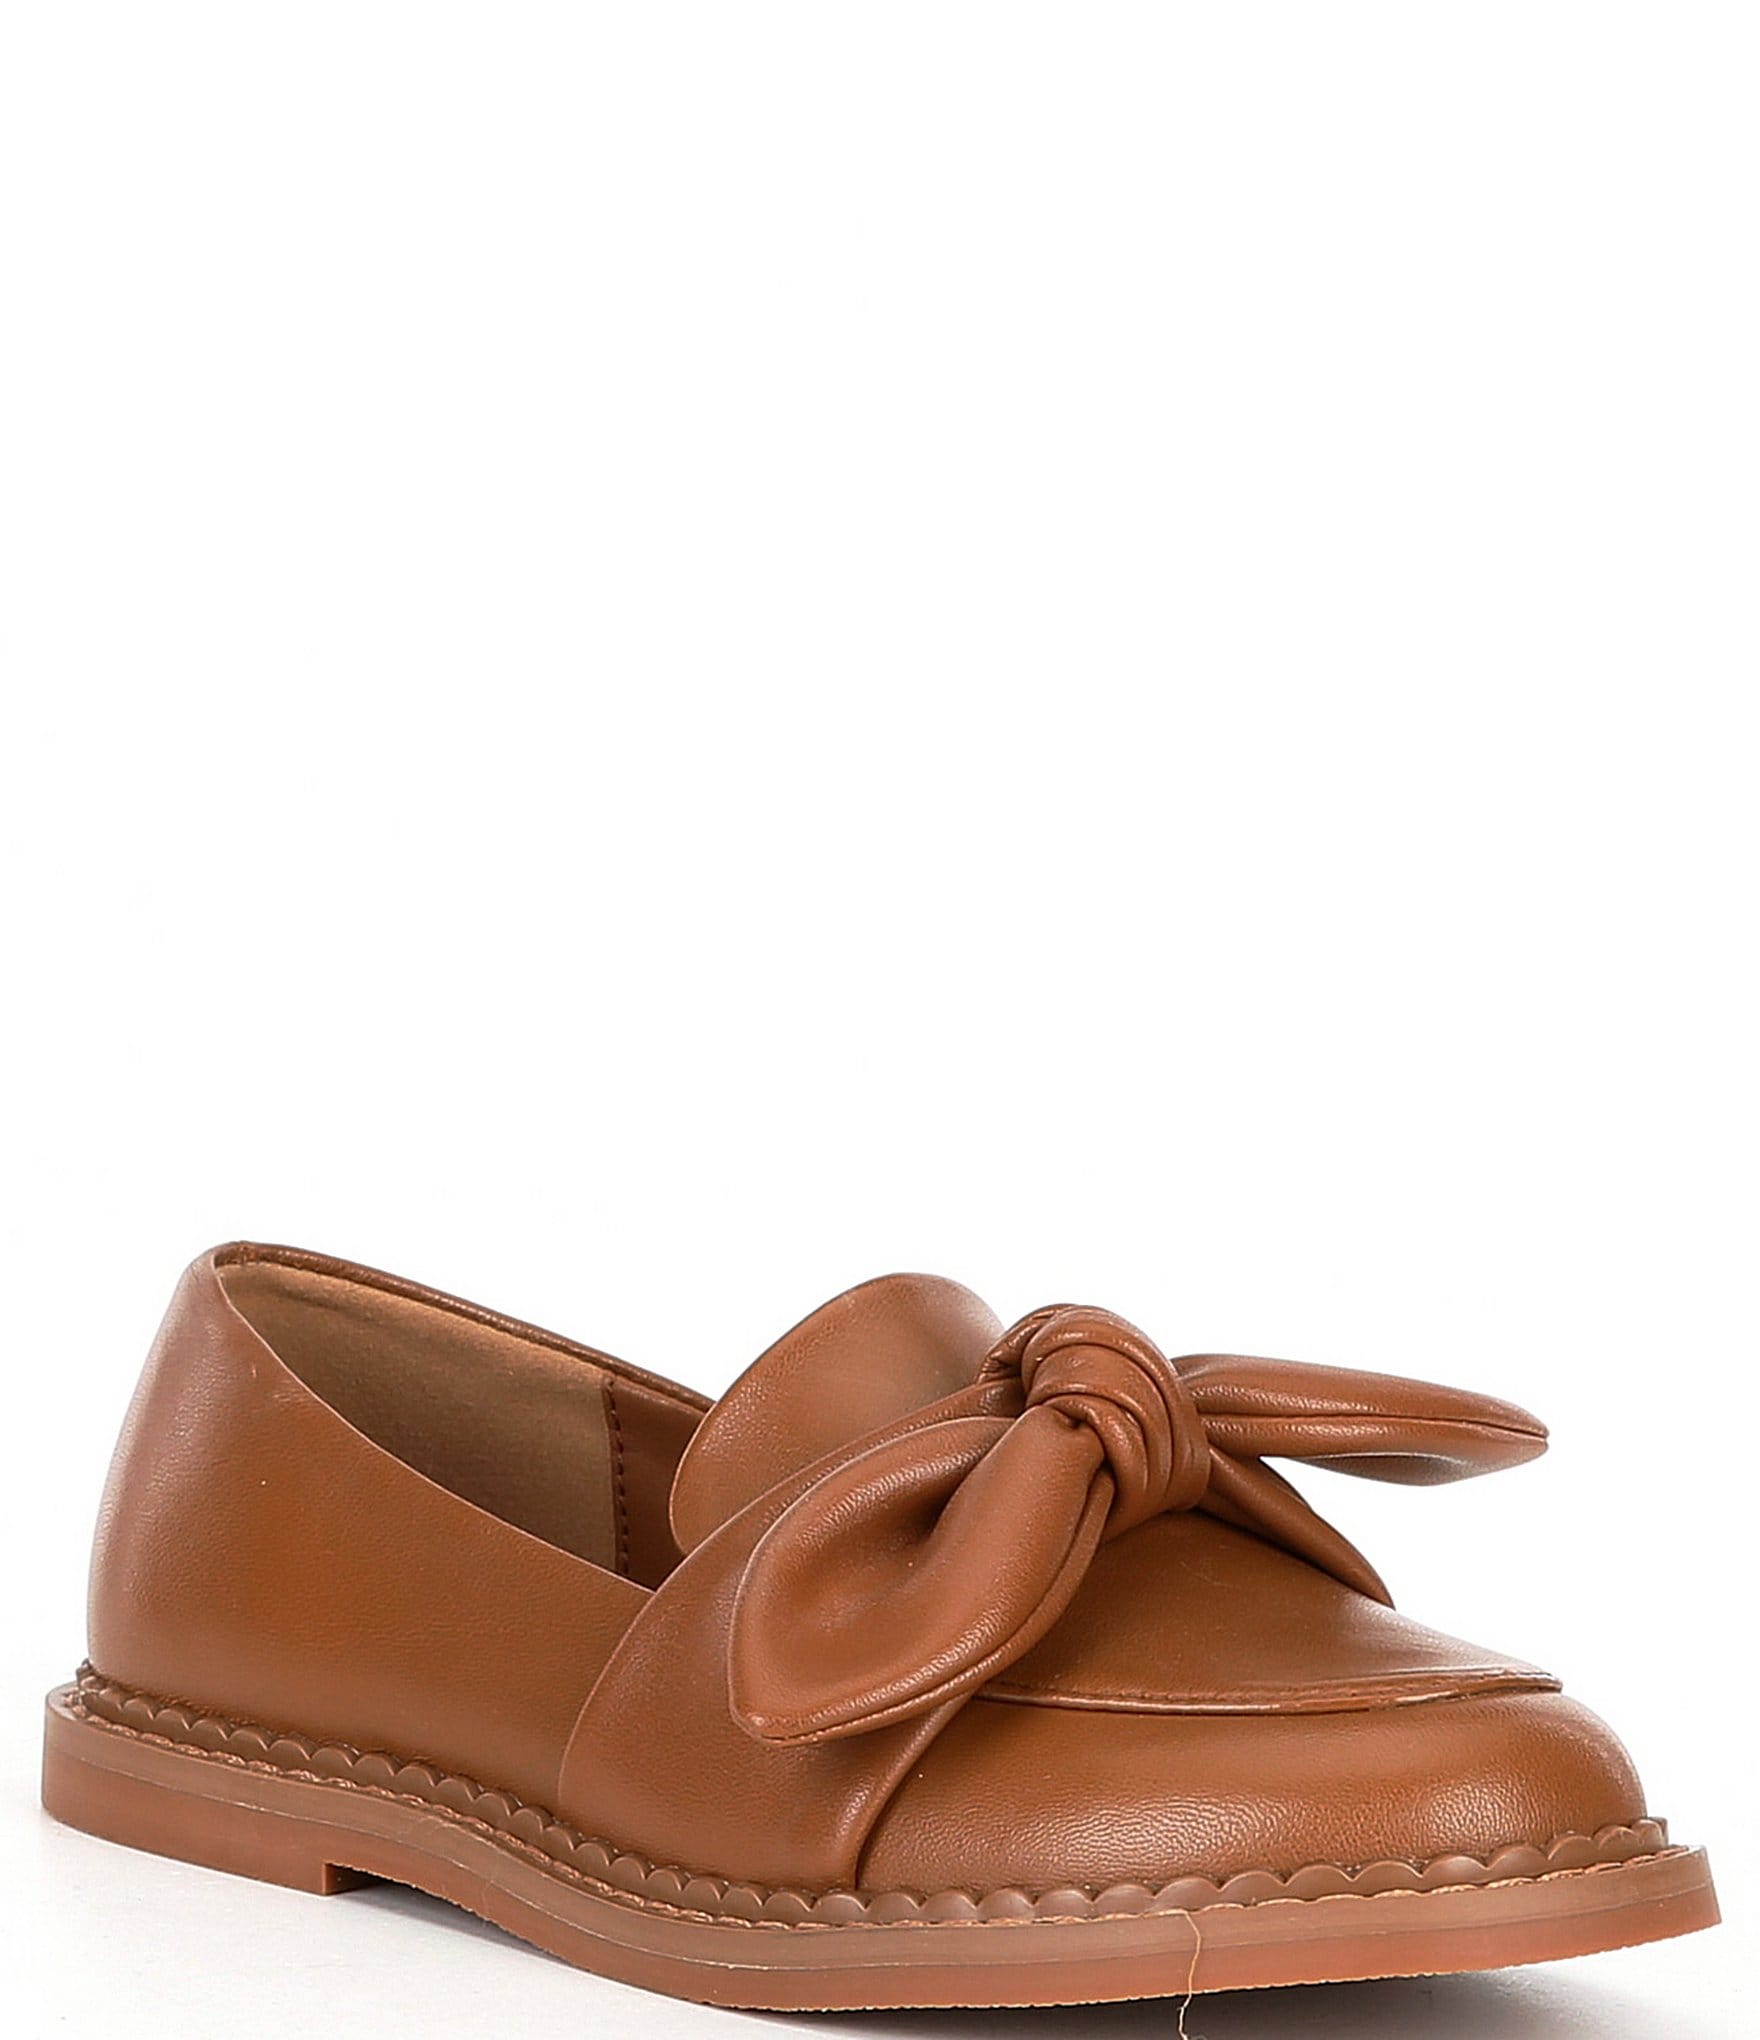 Copper Key Girls' Chicc Big Bow Leather Slip-On Loafers (Youth) | Dillard's